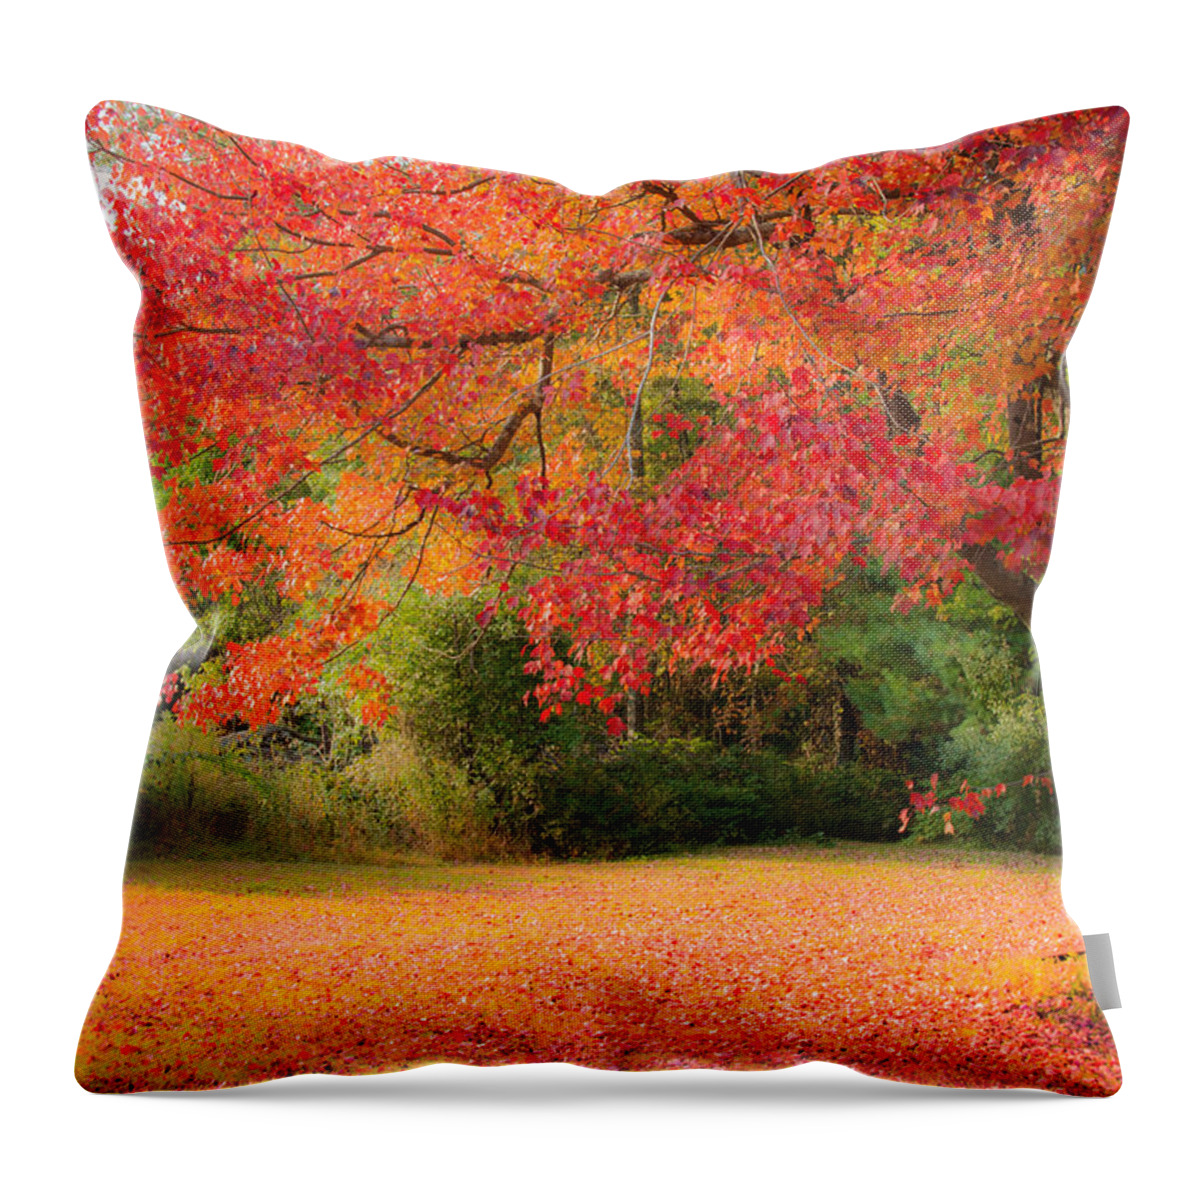 Rhode Island Fall Foliage Throw Pillow featuring the photograph Maple In Red And Orange by Jeff Folger